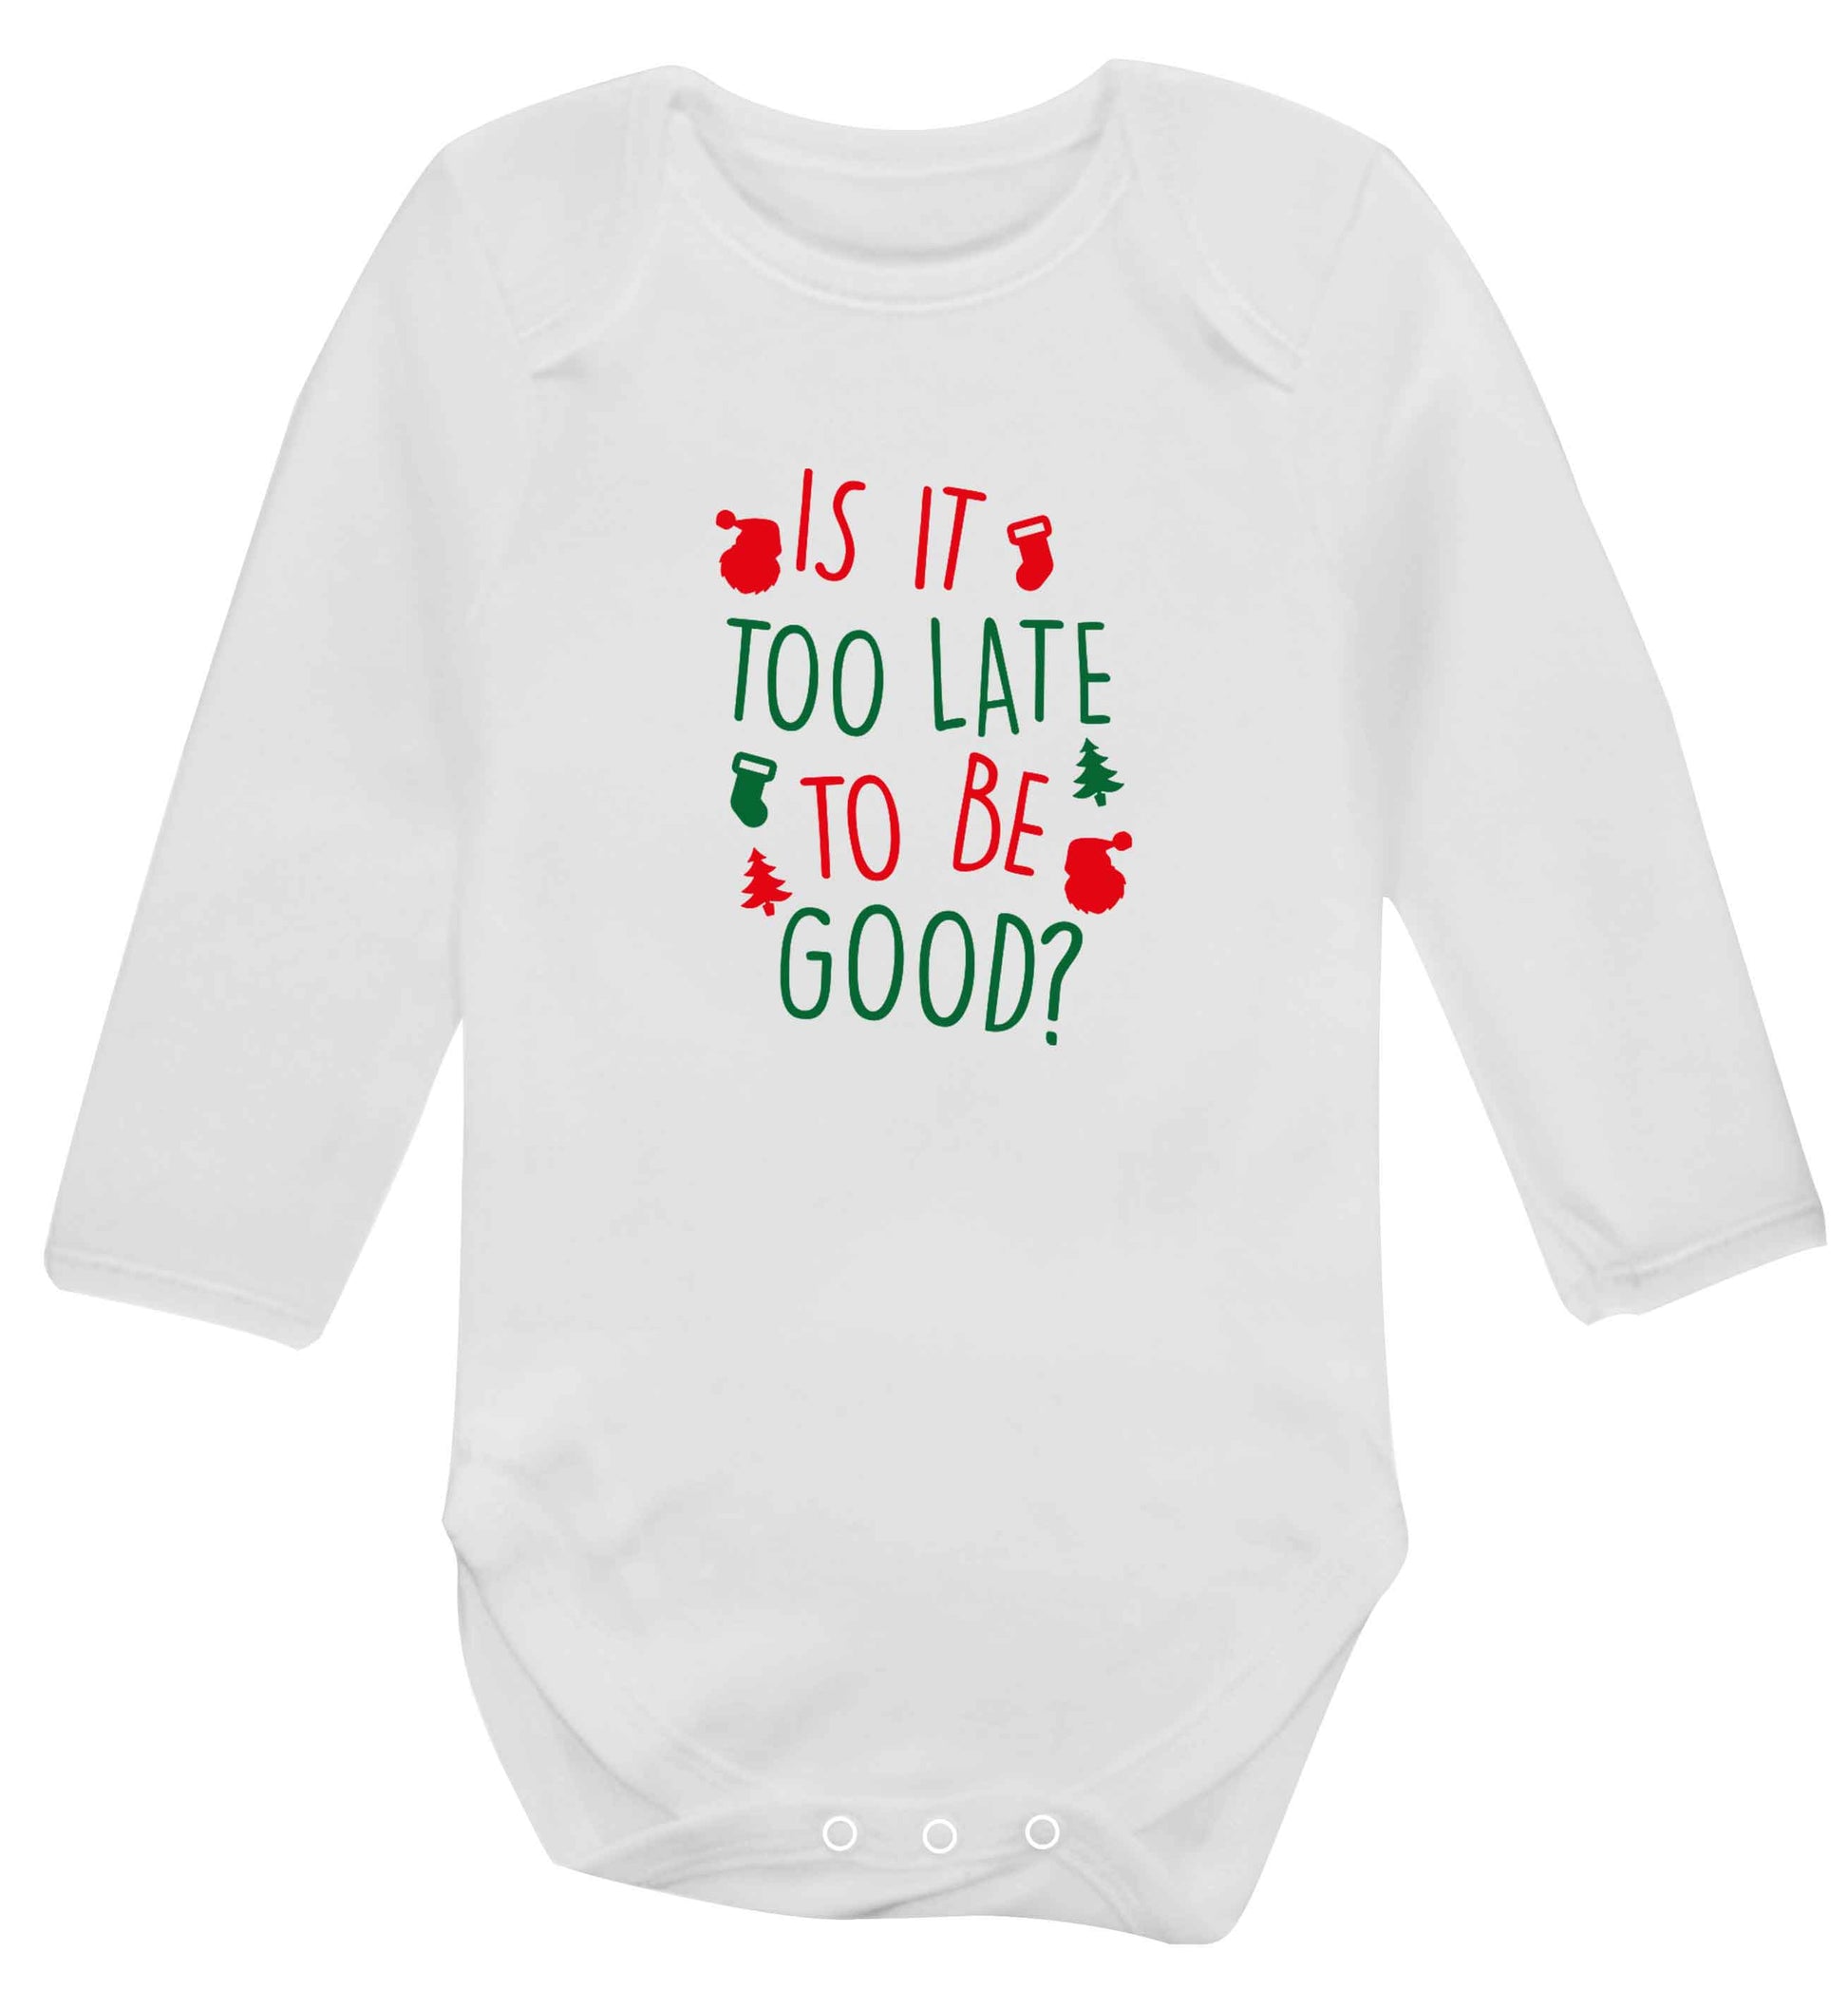 Too Late to be Good baby vest long sleeved white 6-12 months